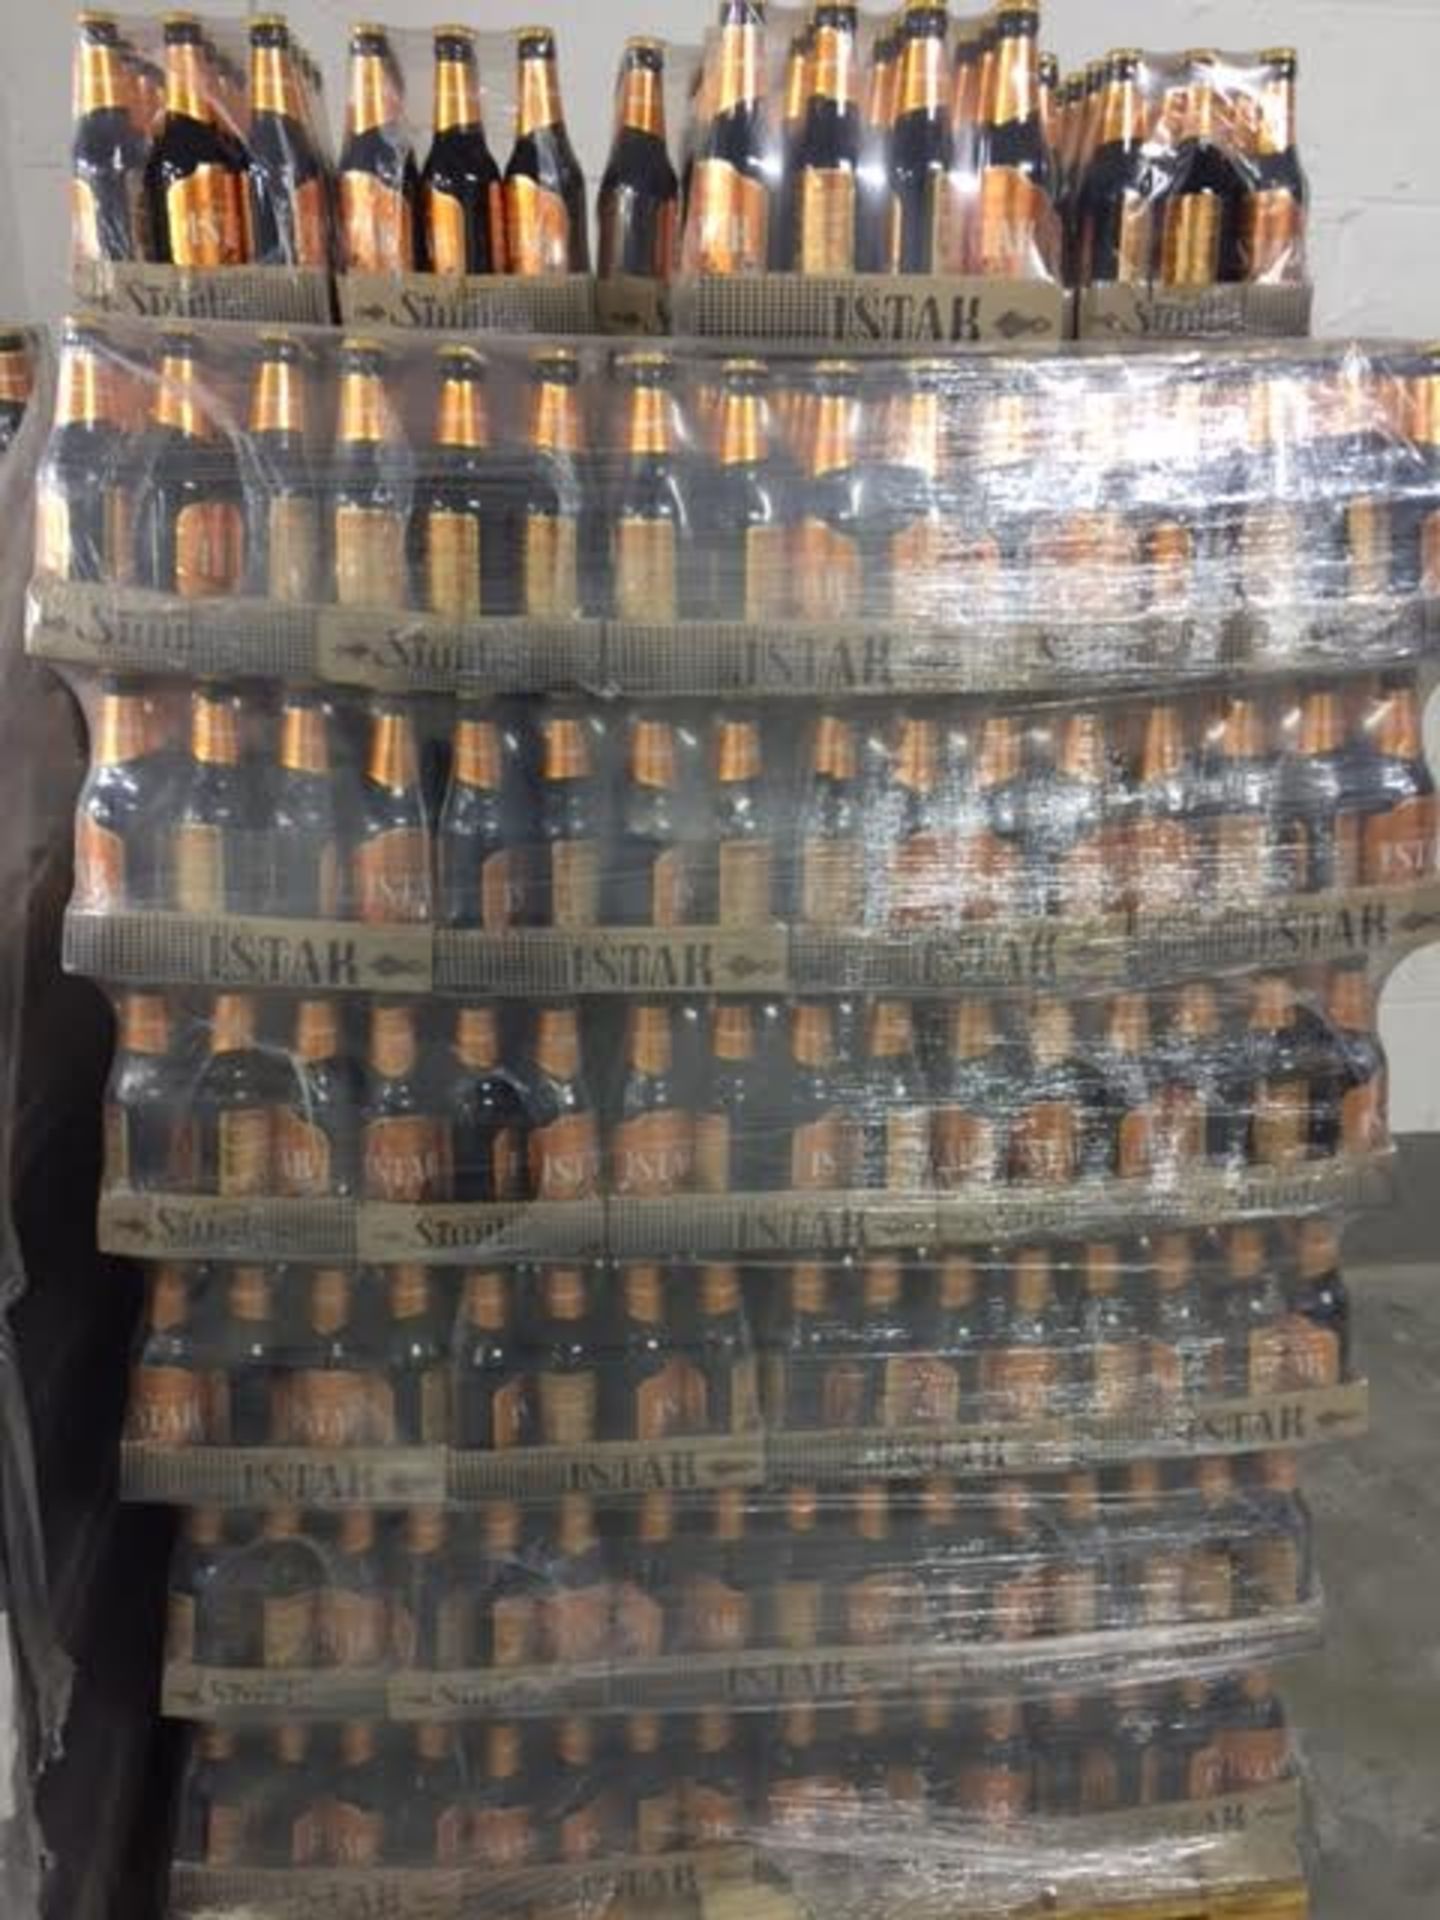 1,200 x Bottles of ISTAK Non Alcoholic Malt Beverage - PINEAPPLE Flavoured Drink - Includes 100 x